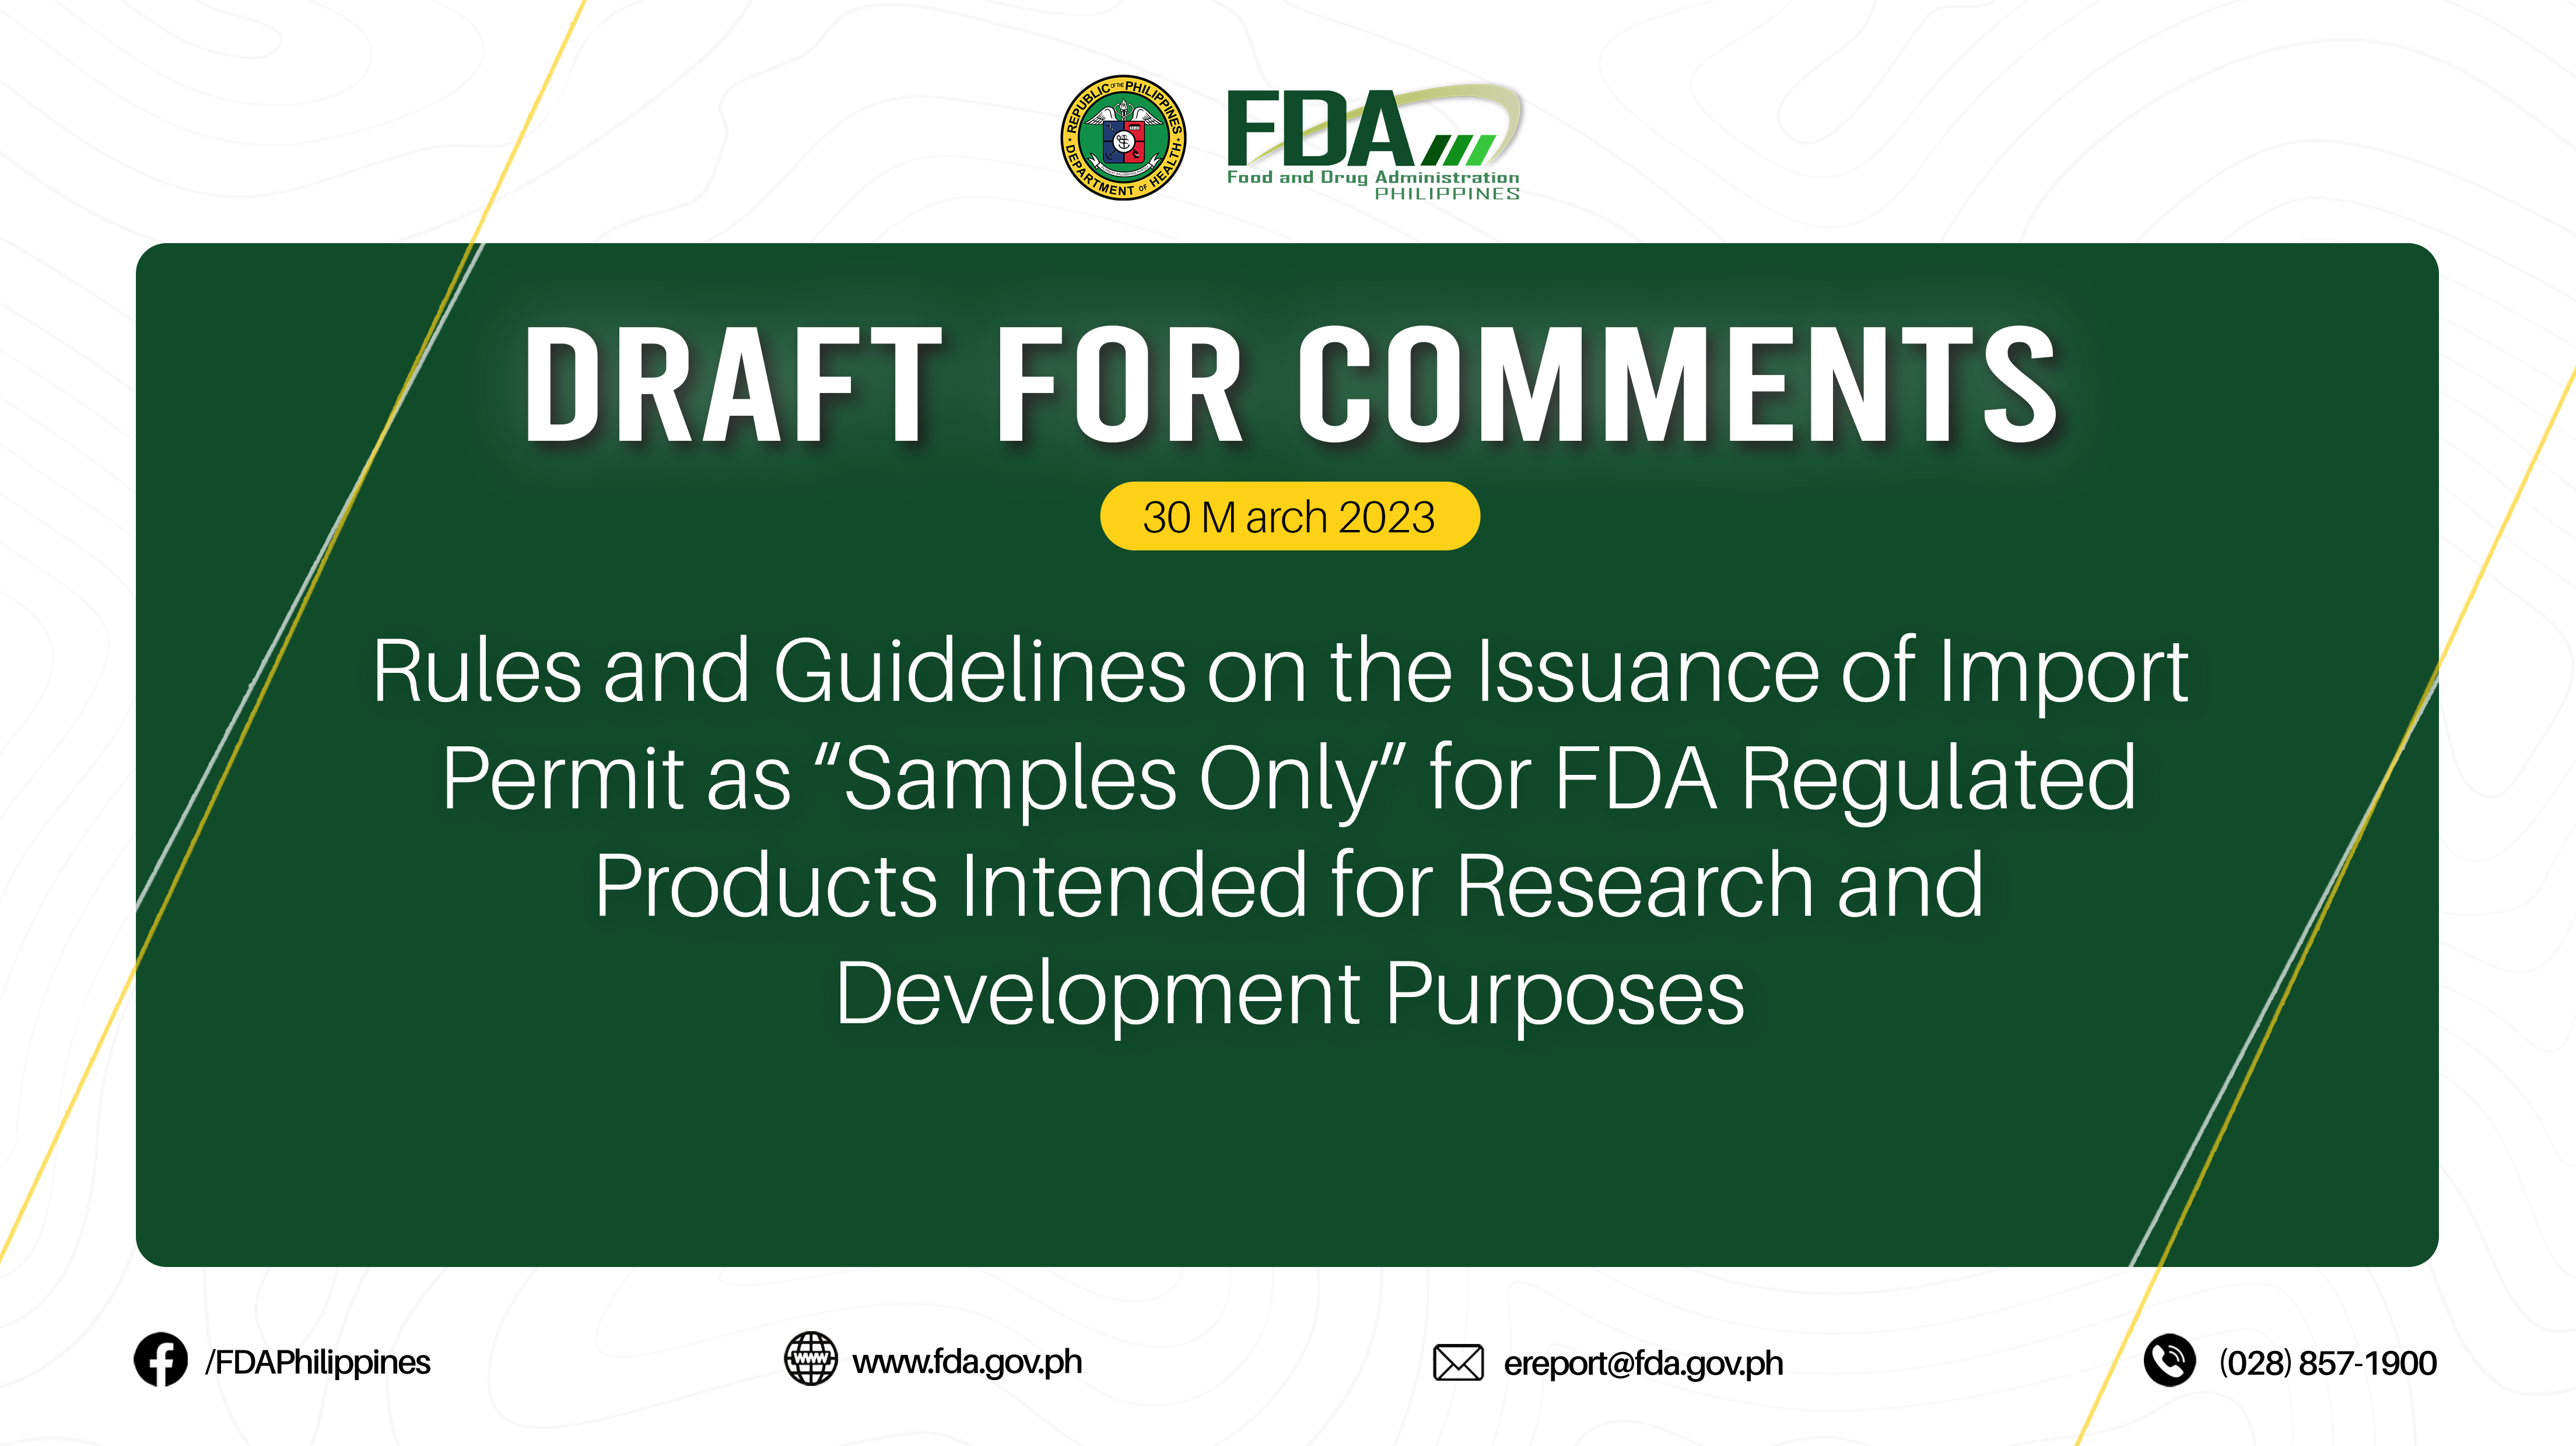 Draft for Comments ||  Rules and Guidelines on the Issuance of Import Permit as “Samples Only” for FDA Regulated Products Intended for Research and Development Purposes